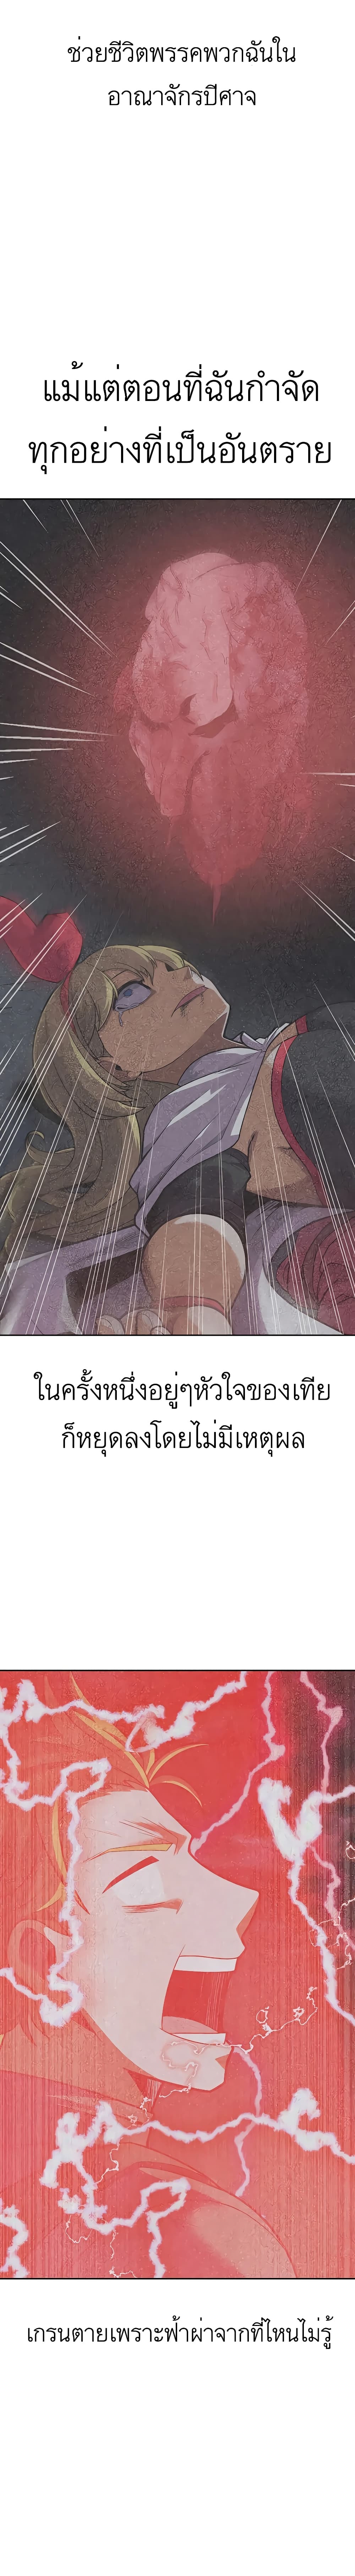 Raising Newbie Heroes In Another World ตอนที่ 27 (13)